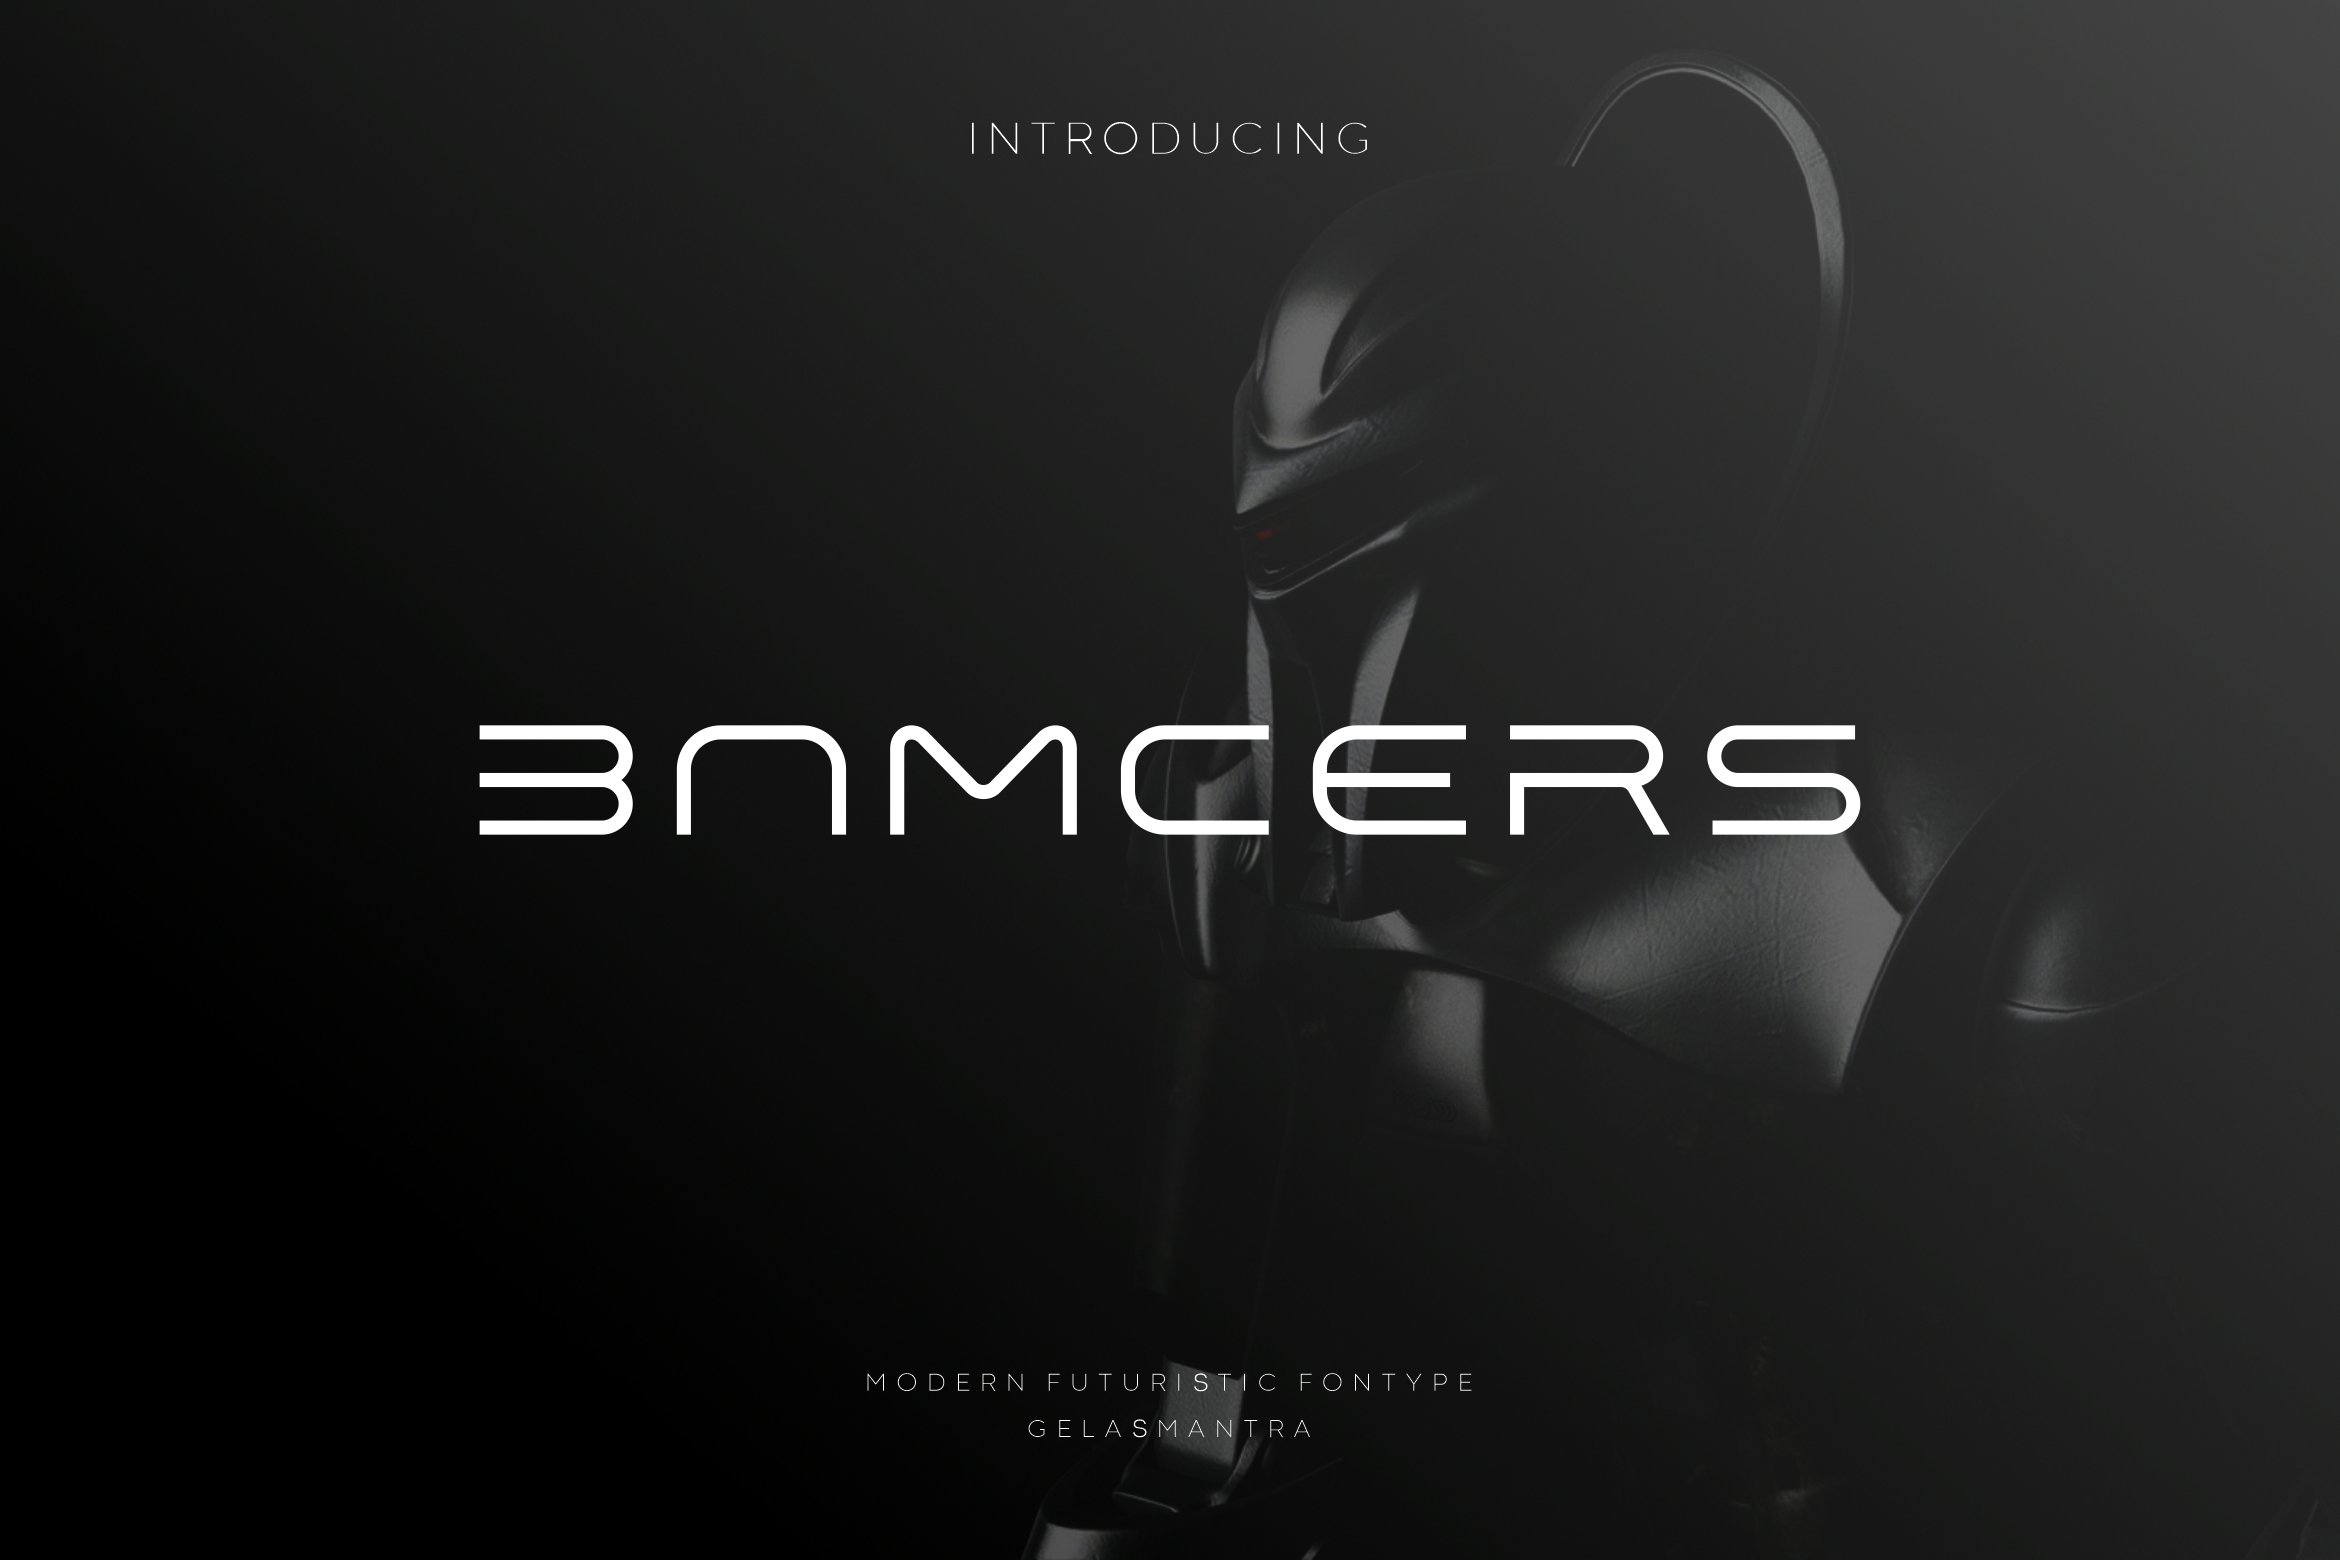 Bamcers cover image.